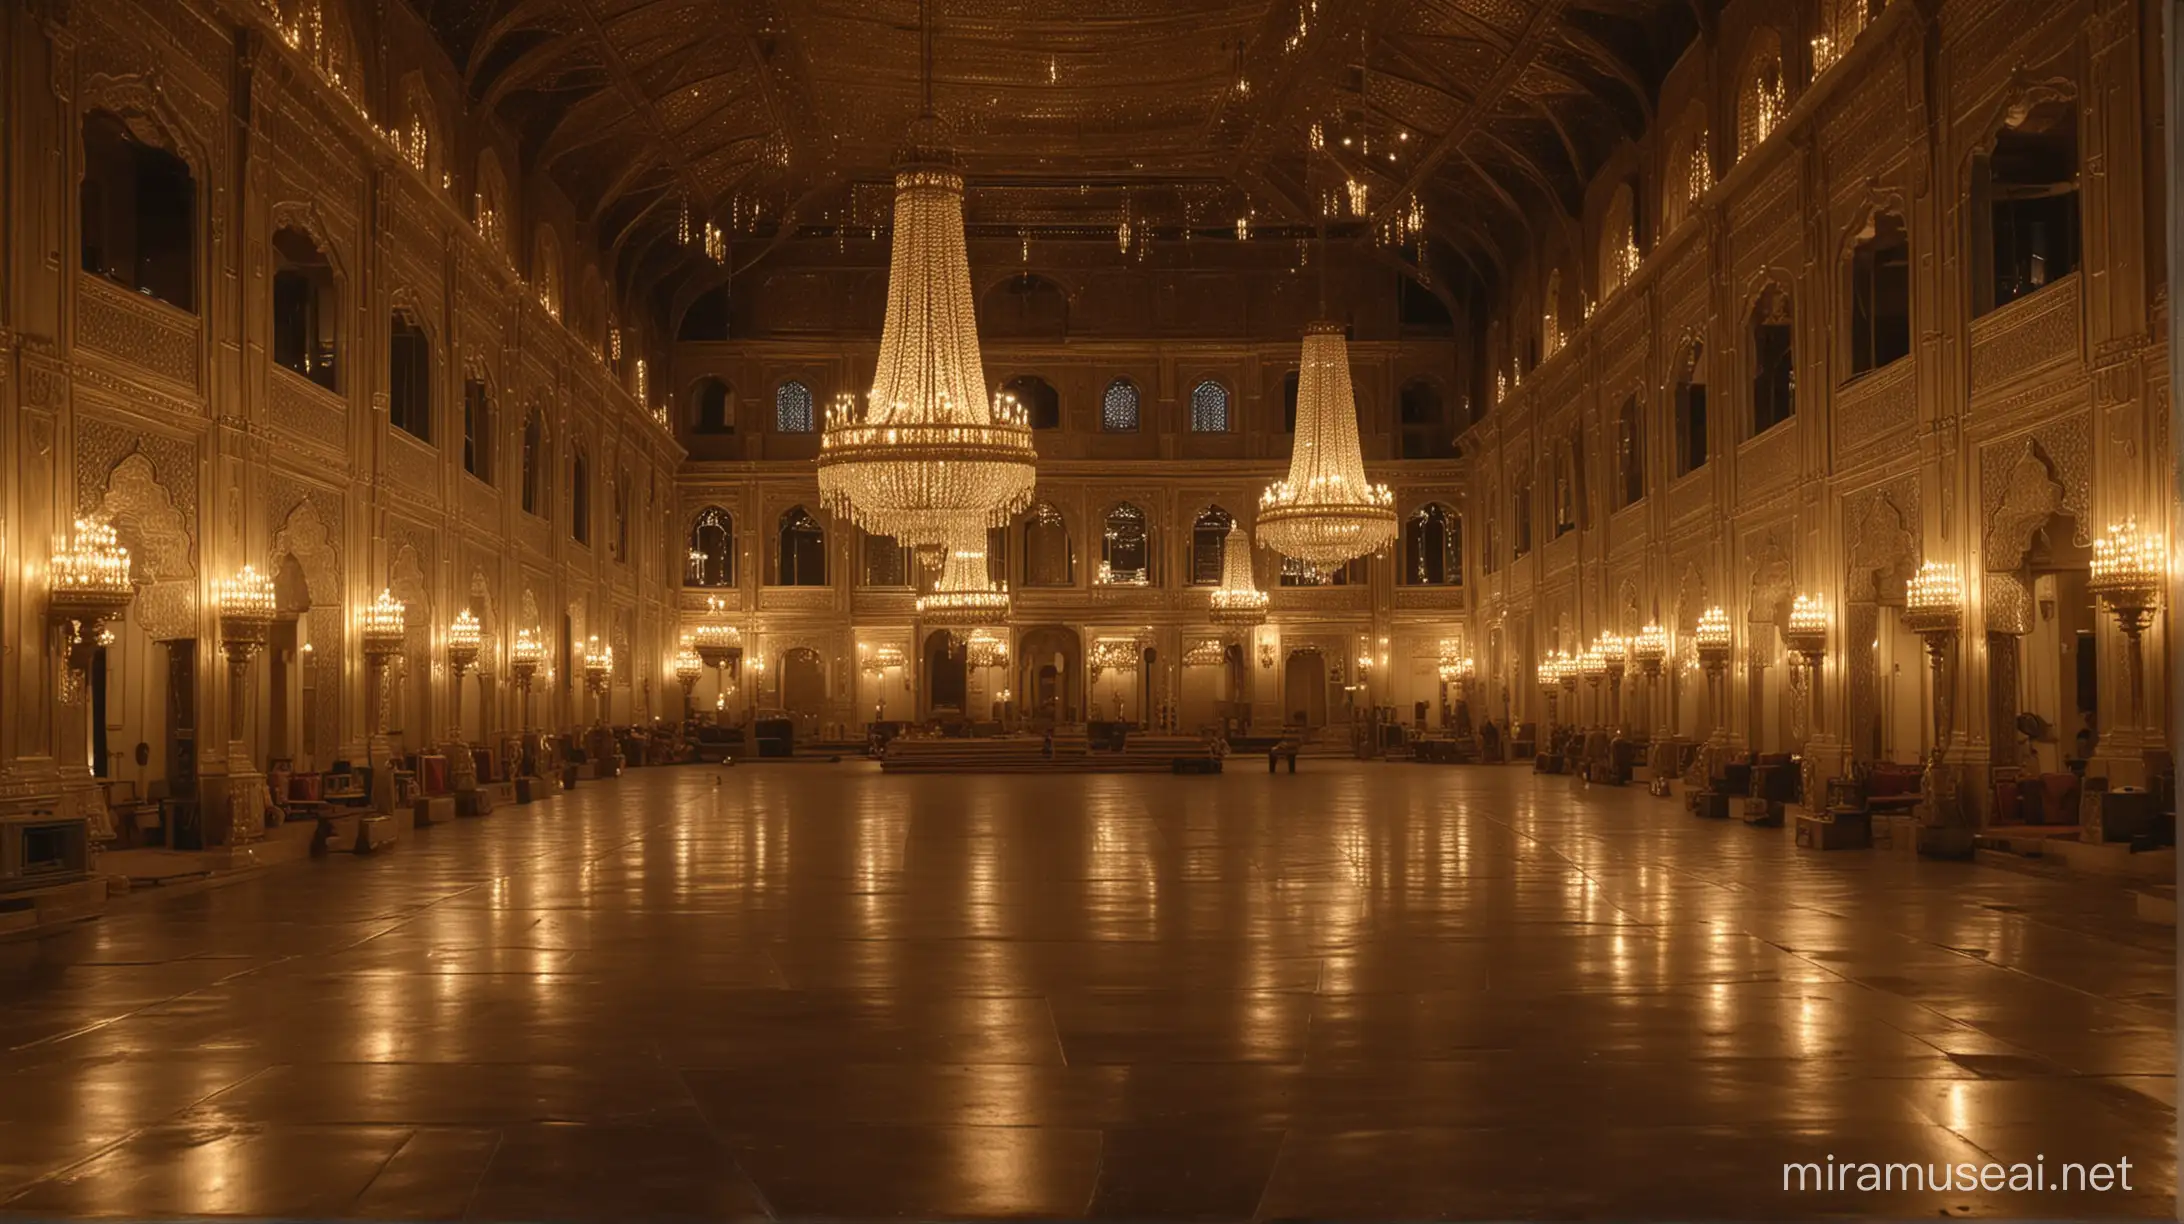 Grand Indian Palace Interior at Night with Candlelight and Gold Silver Embellishments